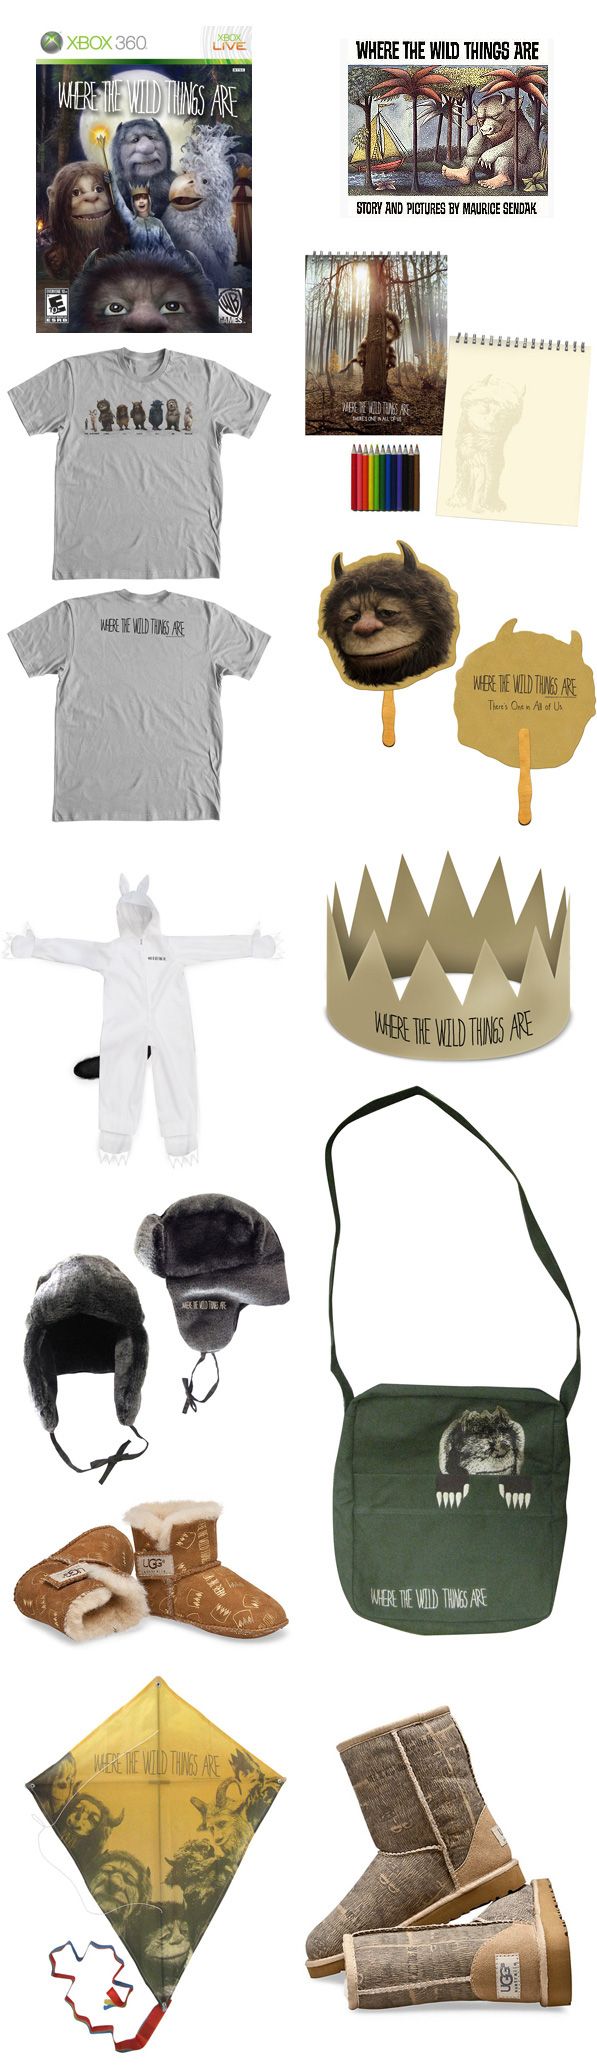 Where the Wild Things Are giveaway Collider.jpg